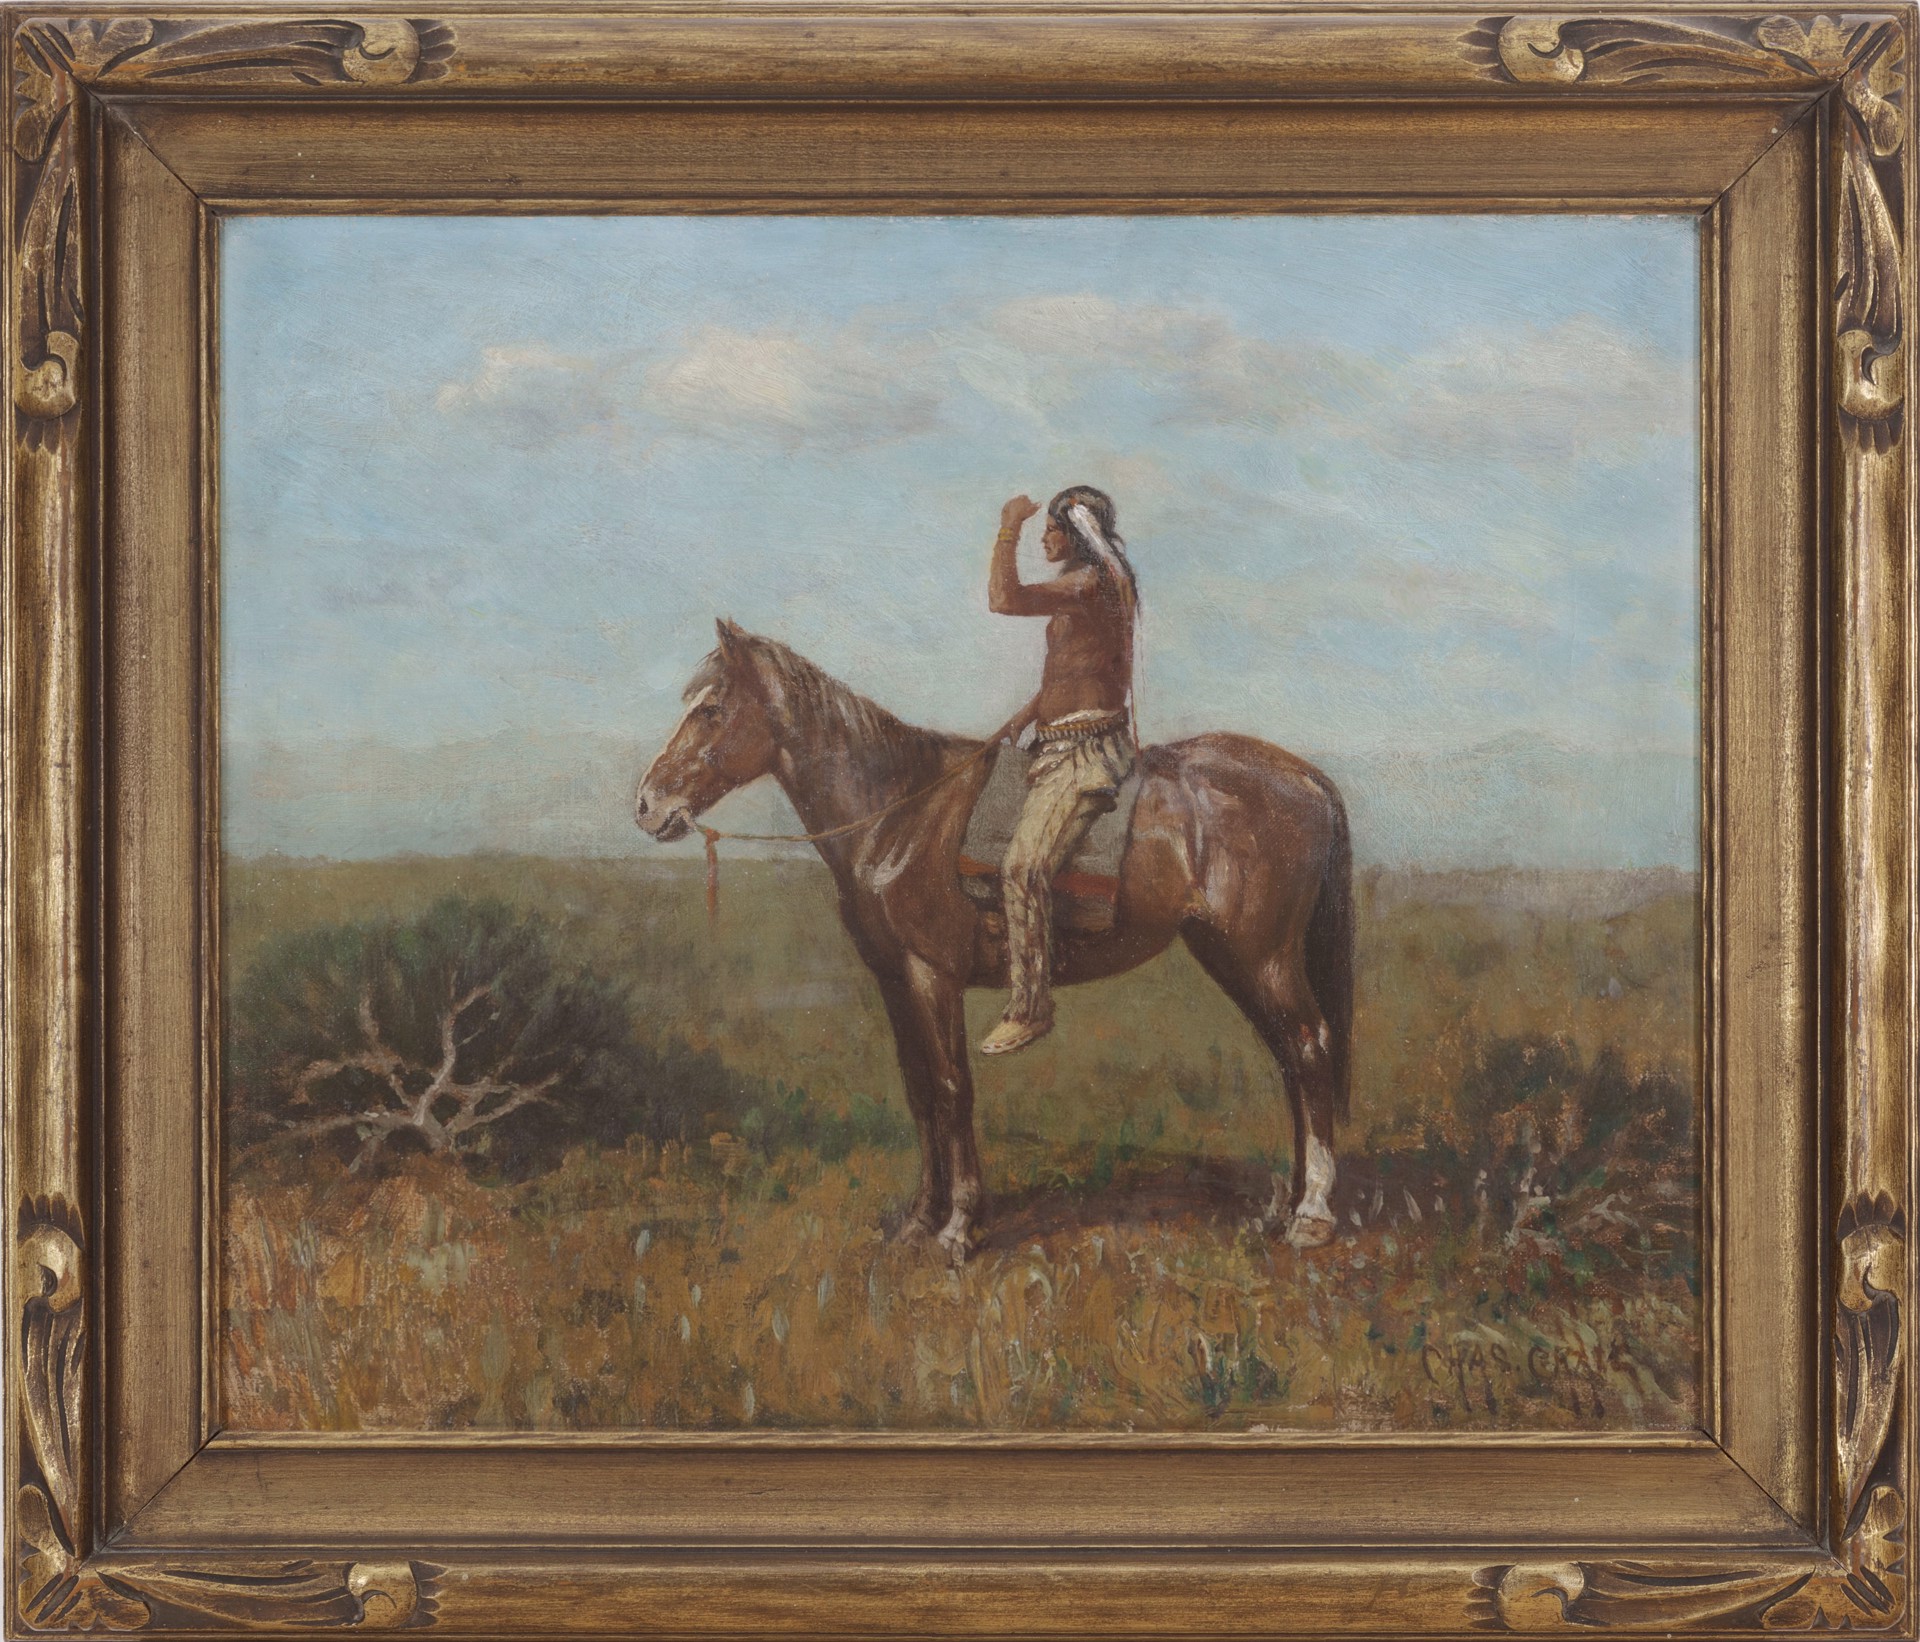 Native American on Horseback (To be sold as pair with 11060g-Cowboy on Horseback) by Charles Craig